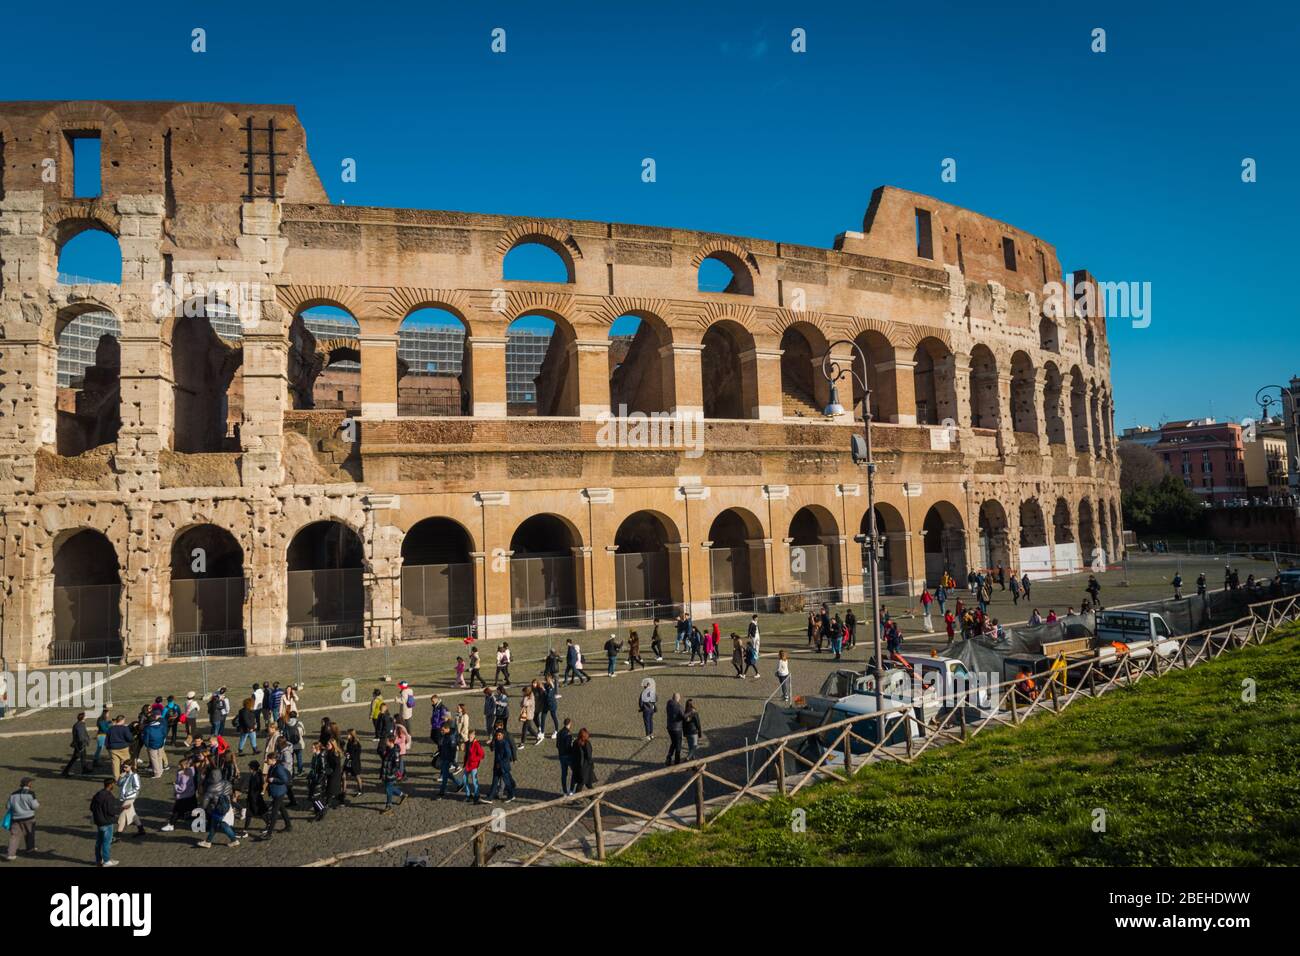 Colosseum in Rome before COVID-19 pandemic Stock Photo